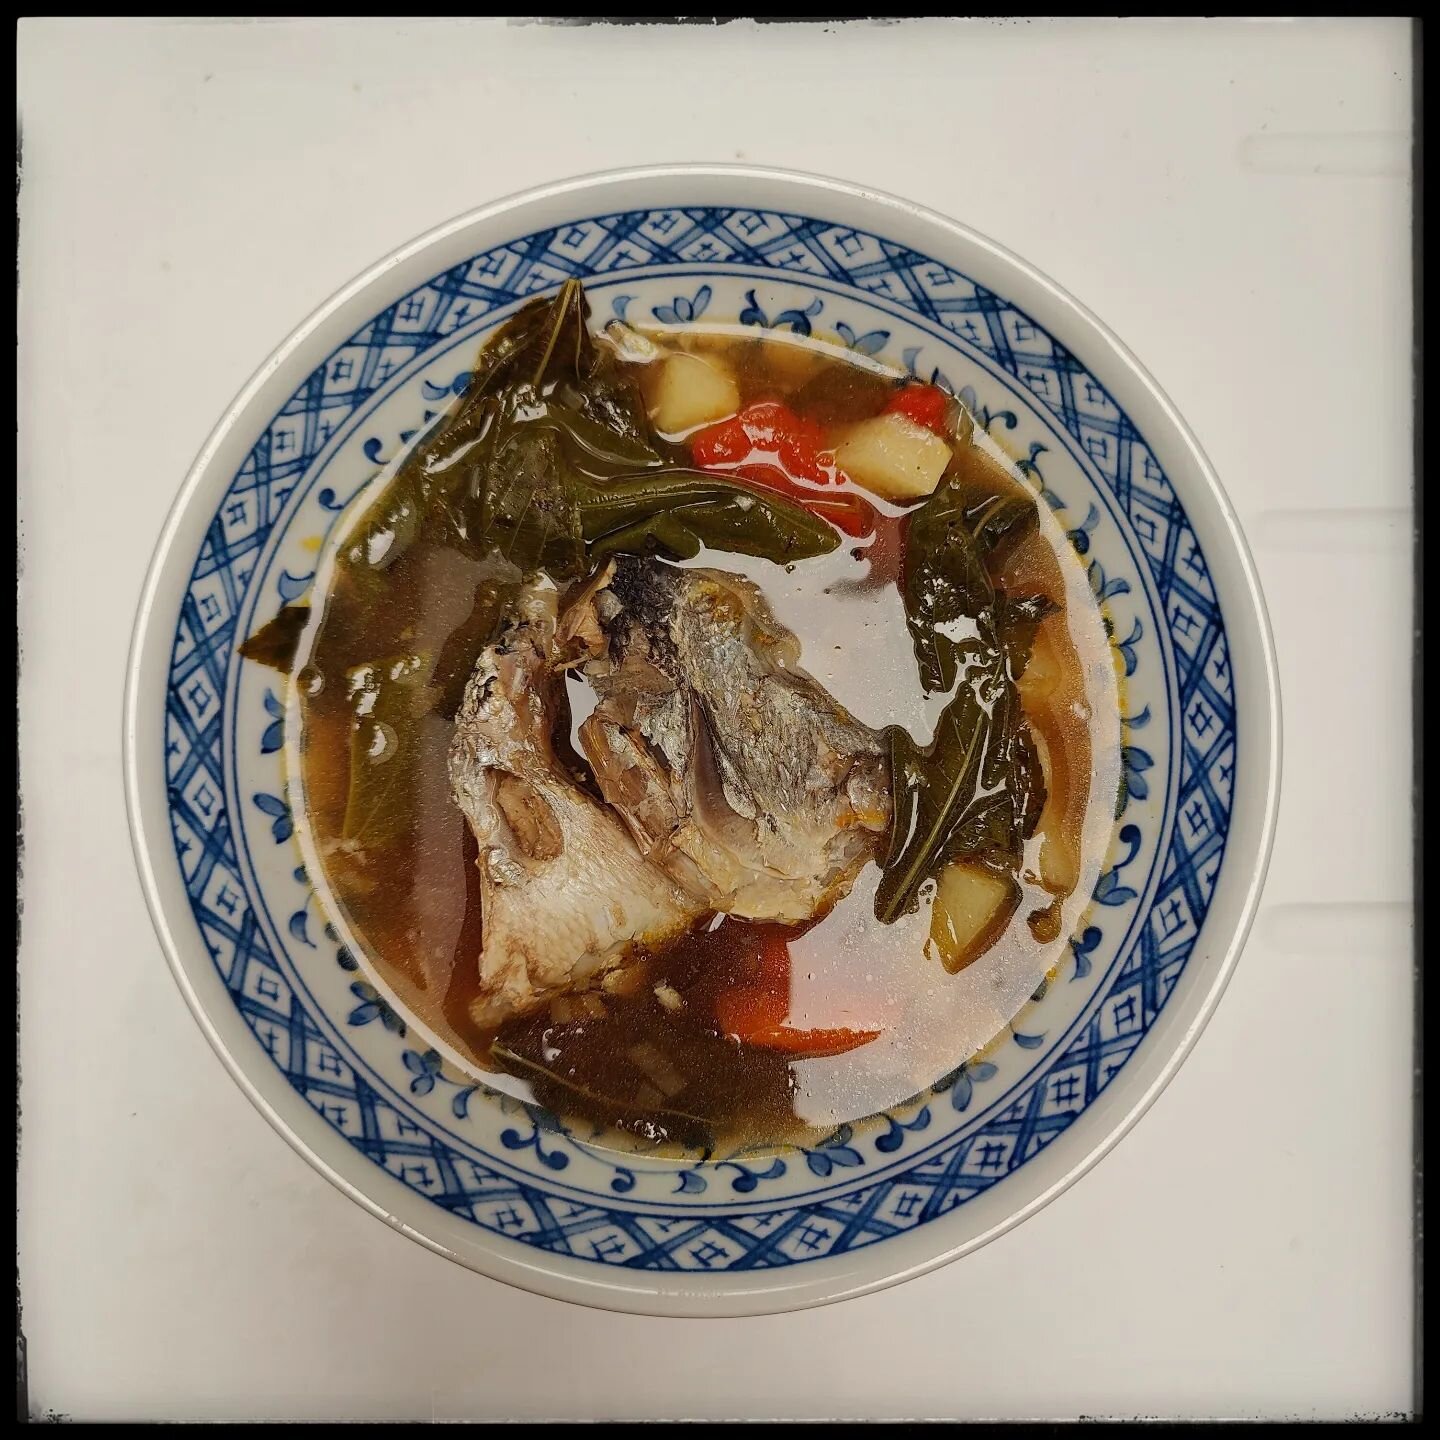 Just some sea bream head sinigang for lunch today. A stew soured with tamarind paste, flavoured with patis (fish sauce), salt and black pepper, bulked up with tomatoes, carrots, sayote (chow chow) and alugbati (Malabar spinach), and of course complet